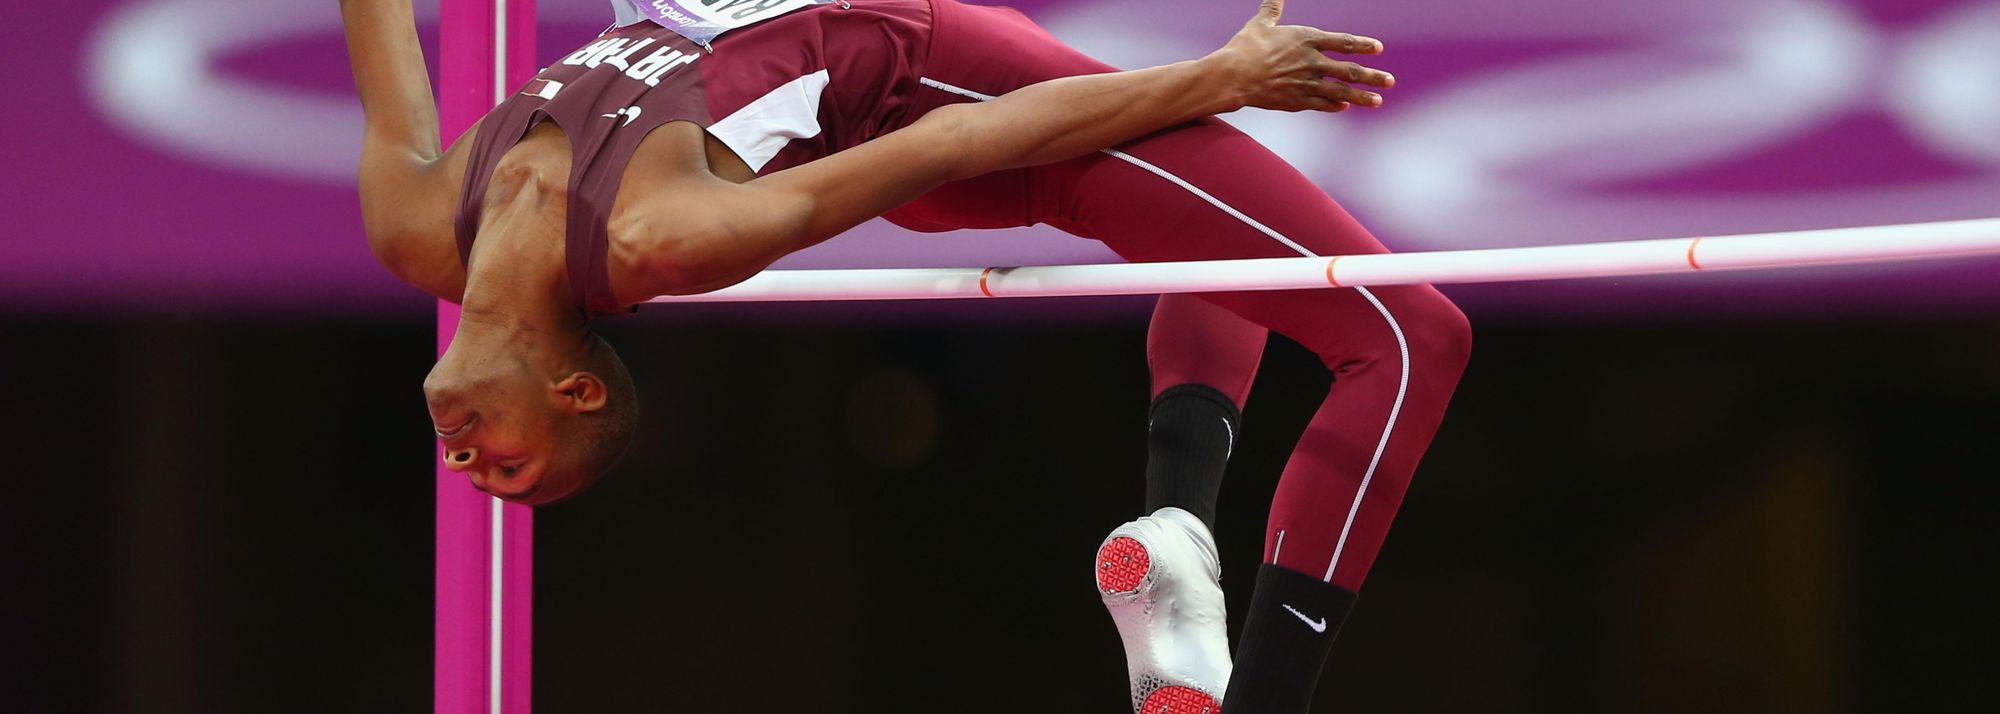 He won Olympic bronze with a broken back, and took part in the greatest world HJ final ever in Moscow. Read Mutaz Barshim's amazing story.